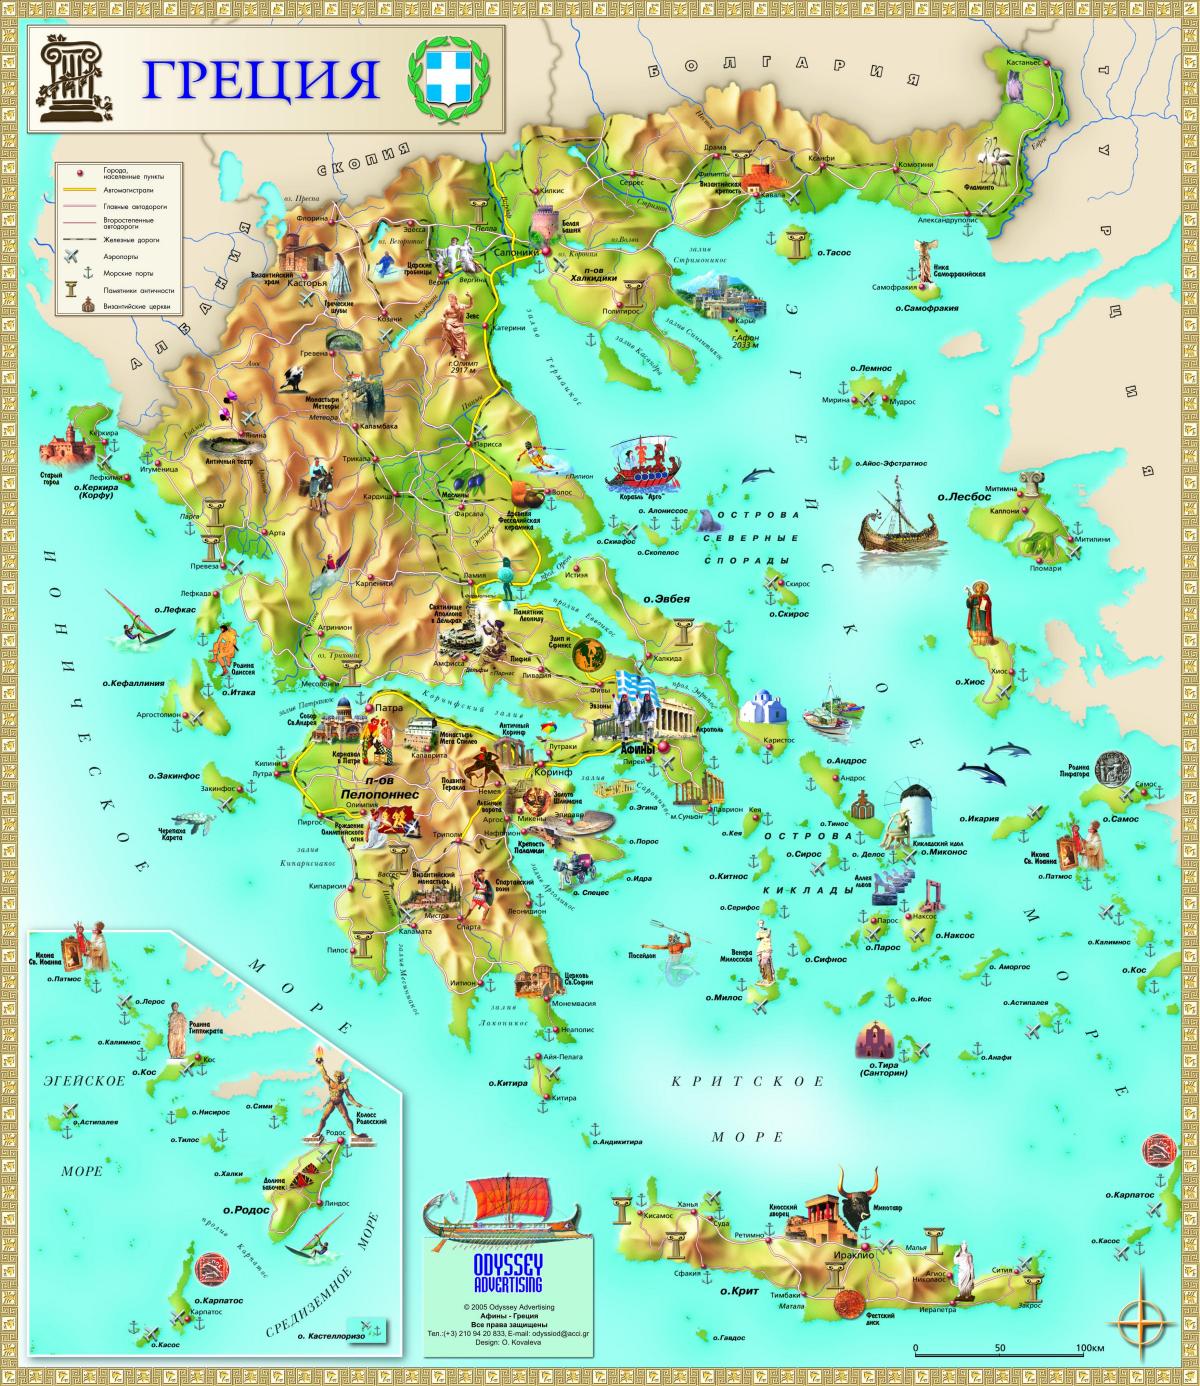 Greece tourist attractions map - Greece map tourist attractions